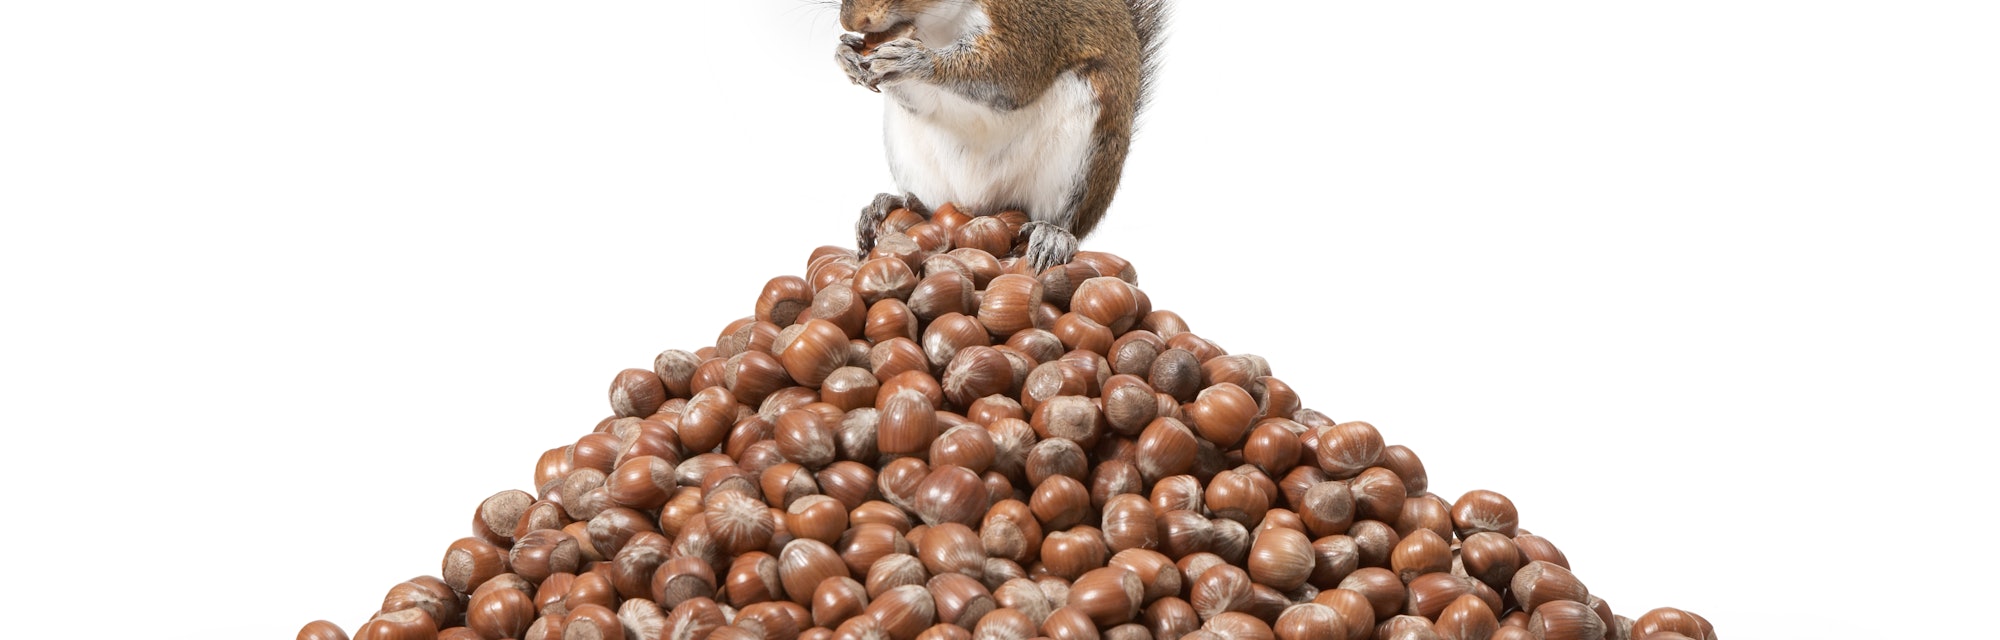 Squirrel sitting on a pile of nuts